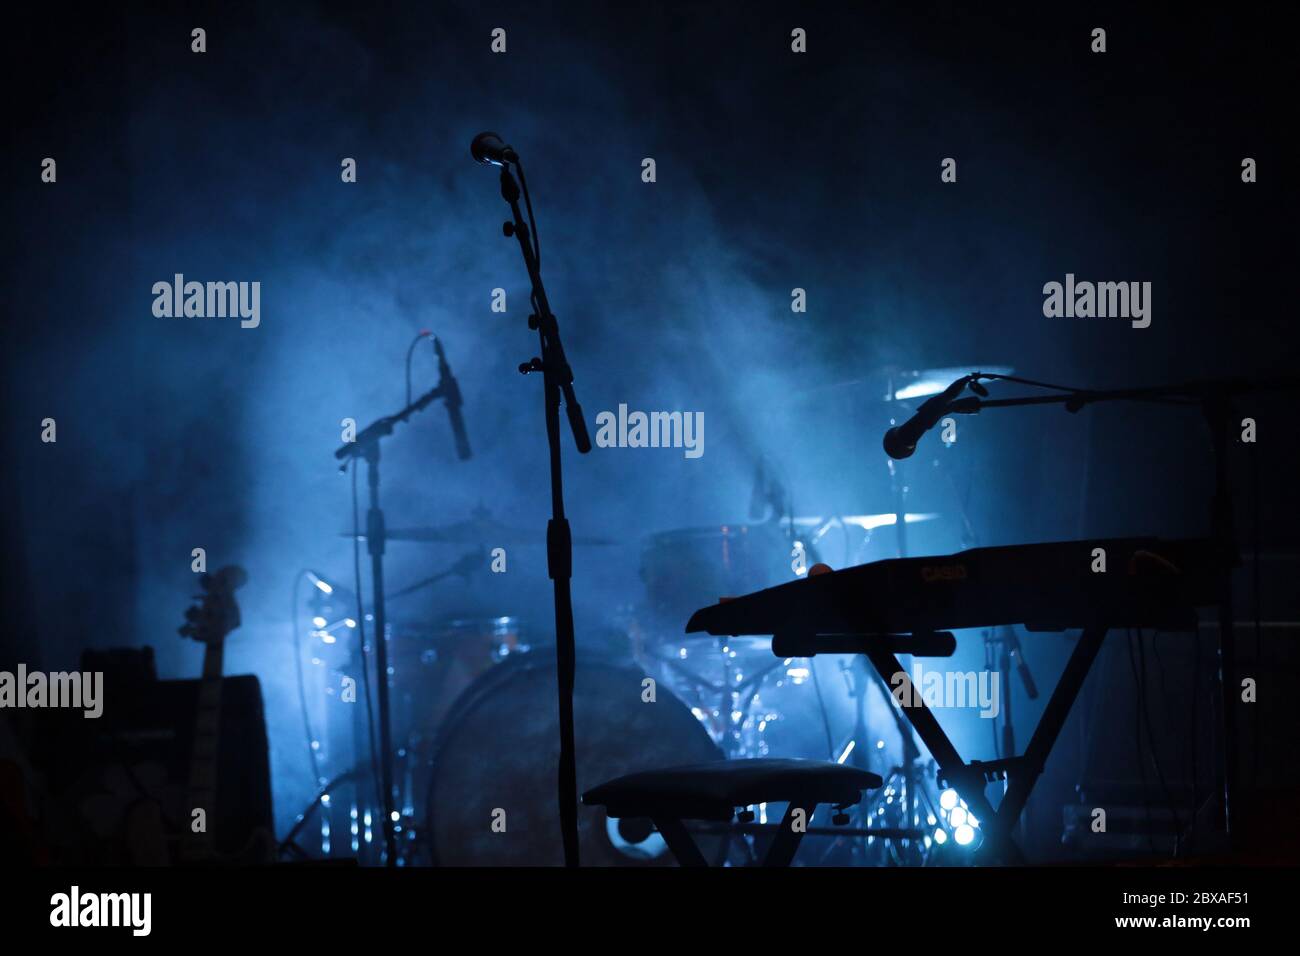 A stage set with instruments and microphones. The smoke and blue light that shows the silhouet of the mics gives a groovy vibe. A typical stage scene. Stock Photo